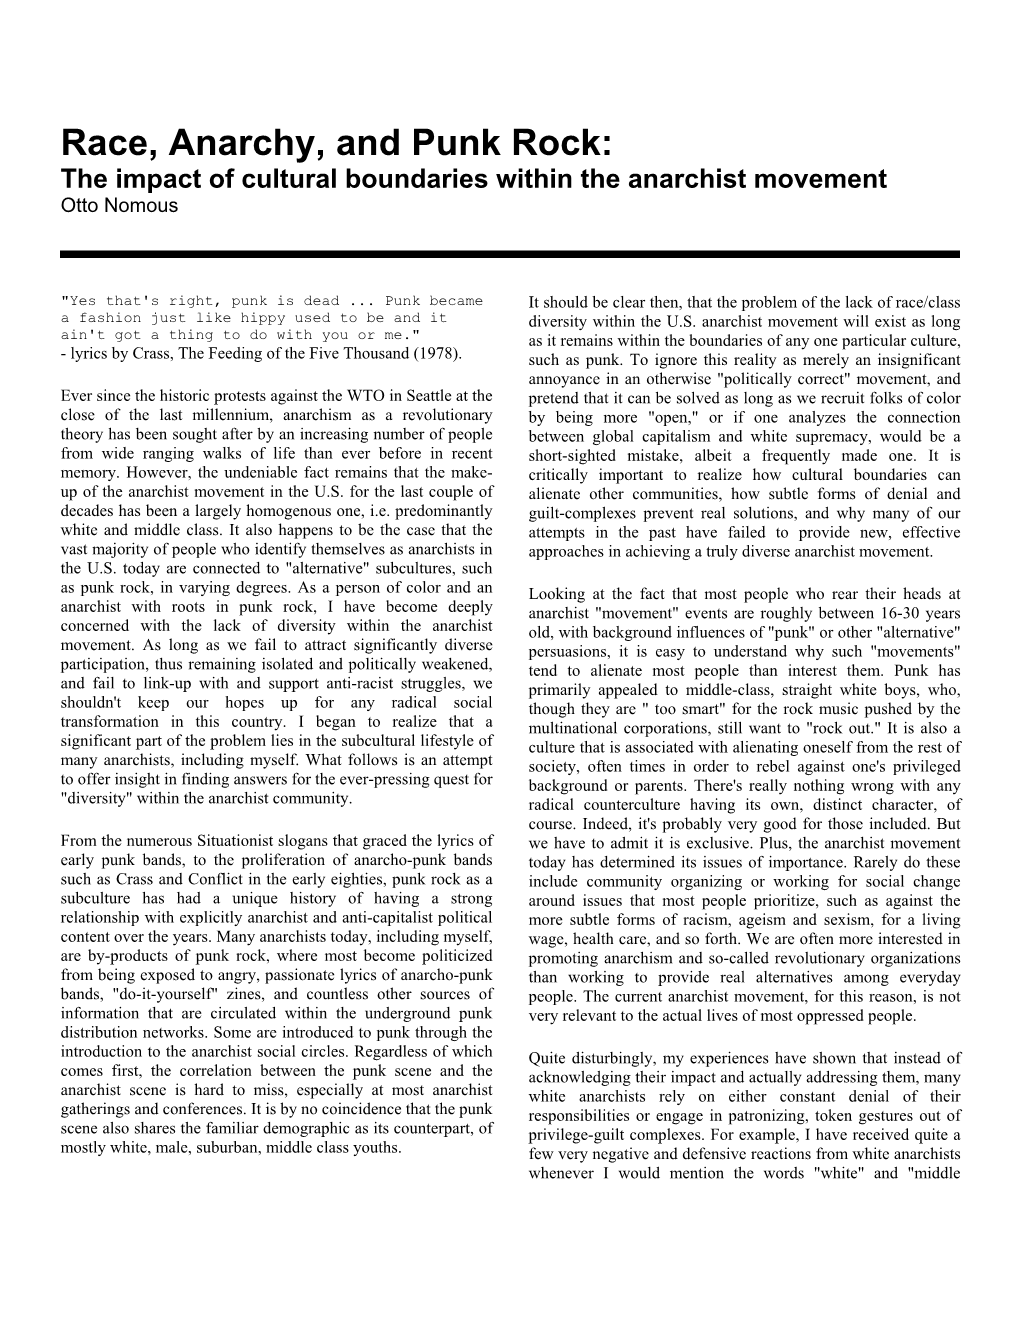 Race, Anarchy, and Punk Rock: the Impact of Cultural Boundaries Within the Anarchist Movement Otto Nomous